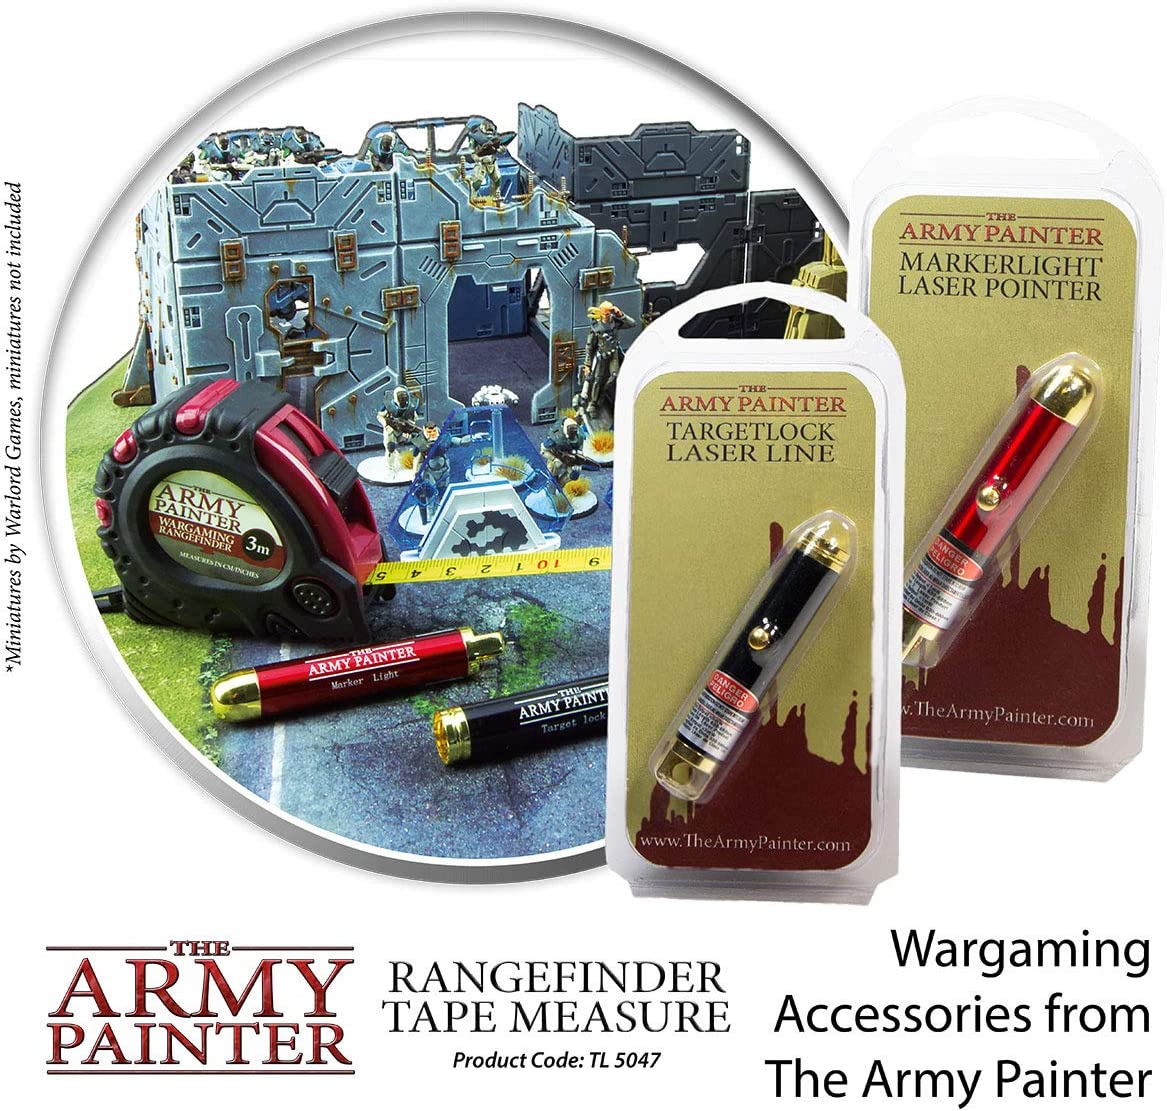 The Army Painter - Rangefinder Tape Measure